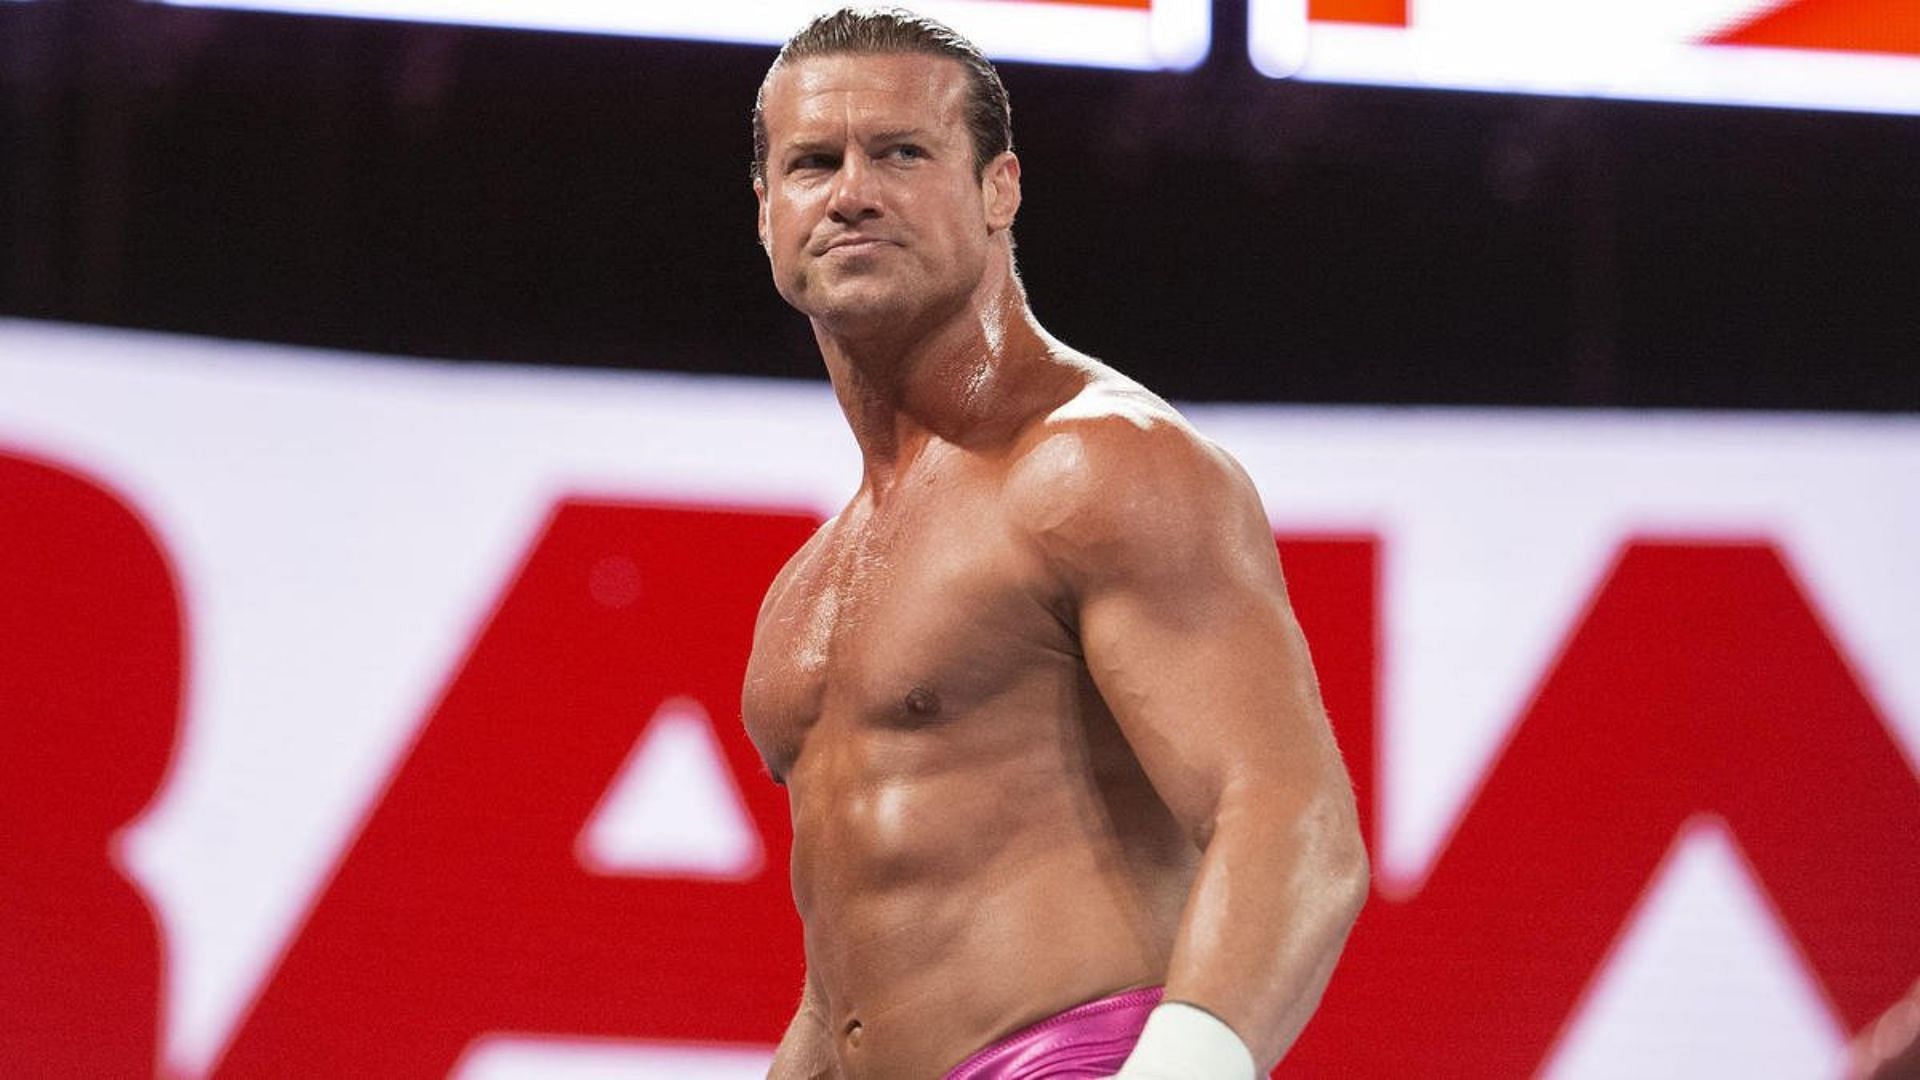 An AEW star has reacted to Dolph Ziggler